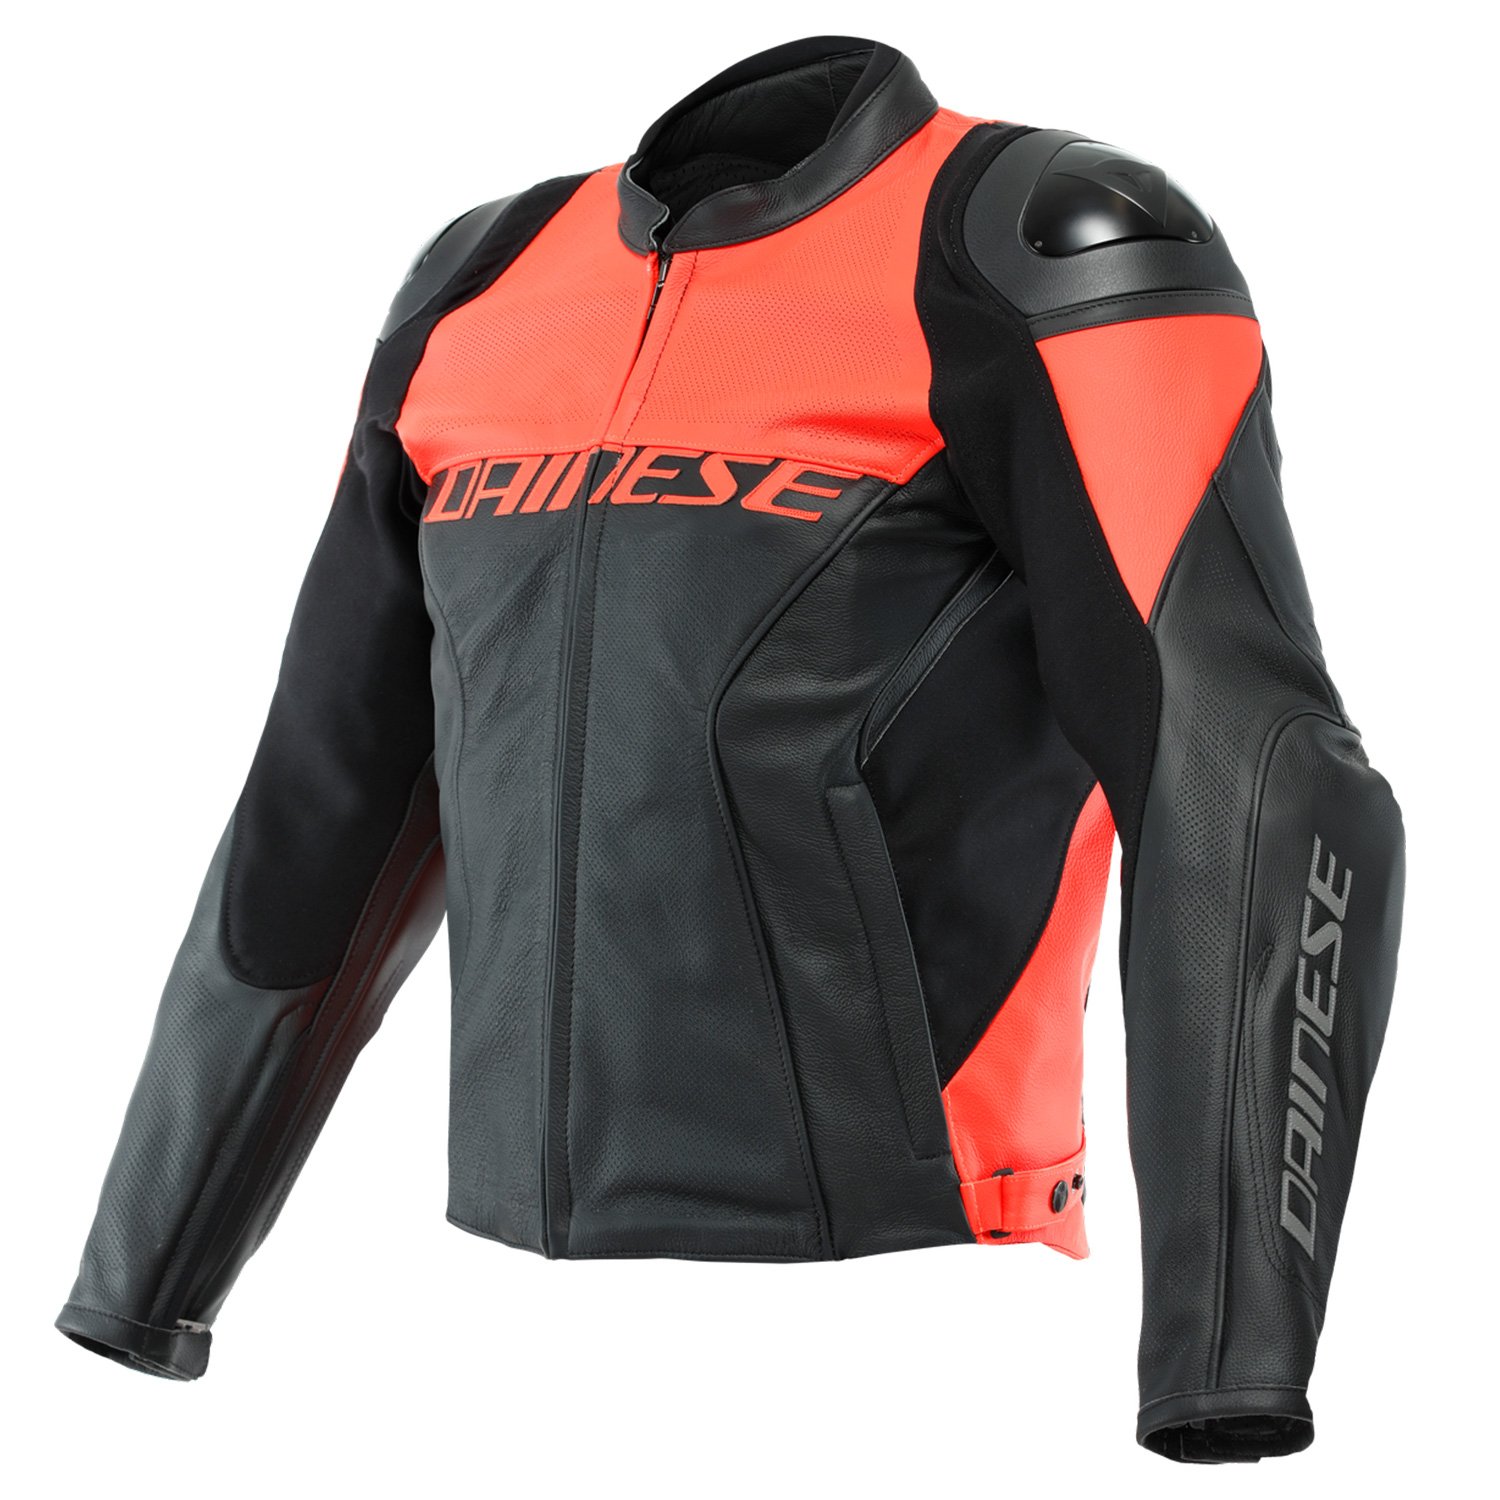 Image of Dainese Racing 4 Perforated Leather Jacket Black Fluo Red Size 54 ID 8051019302953